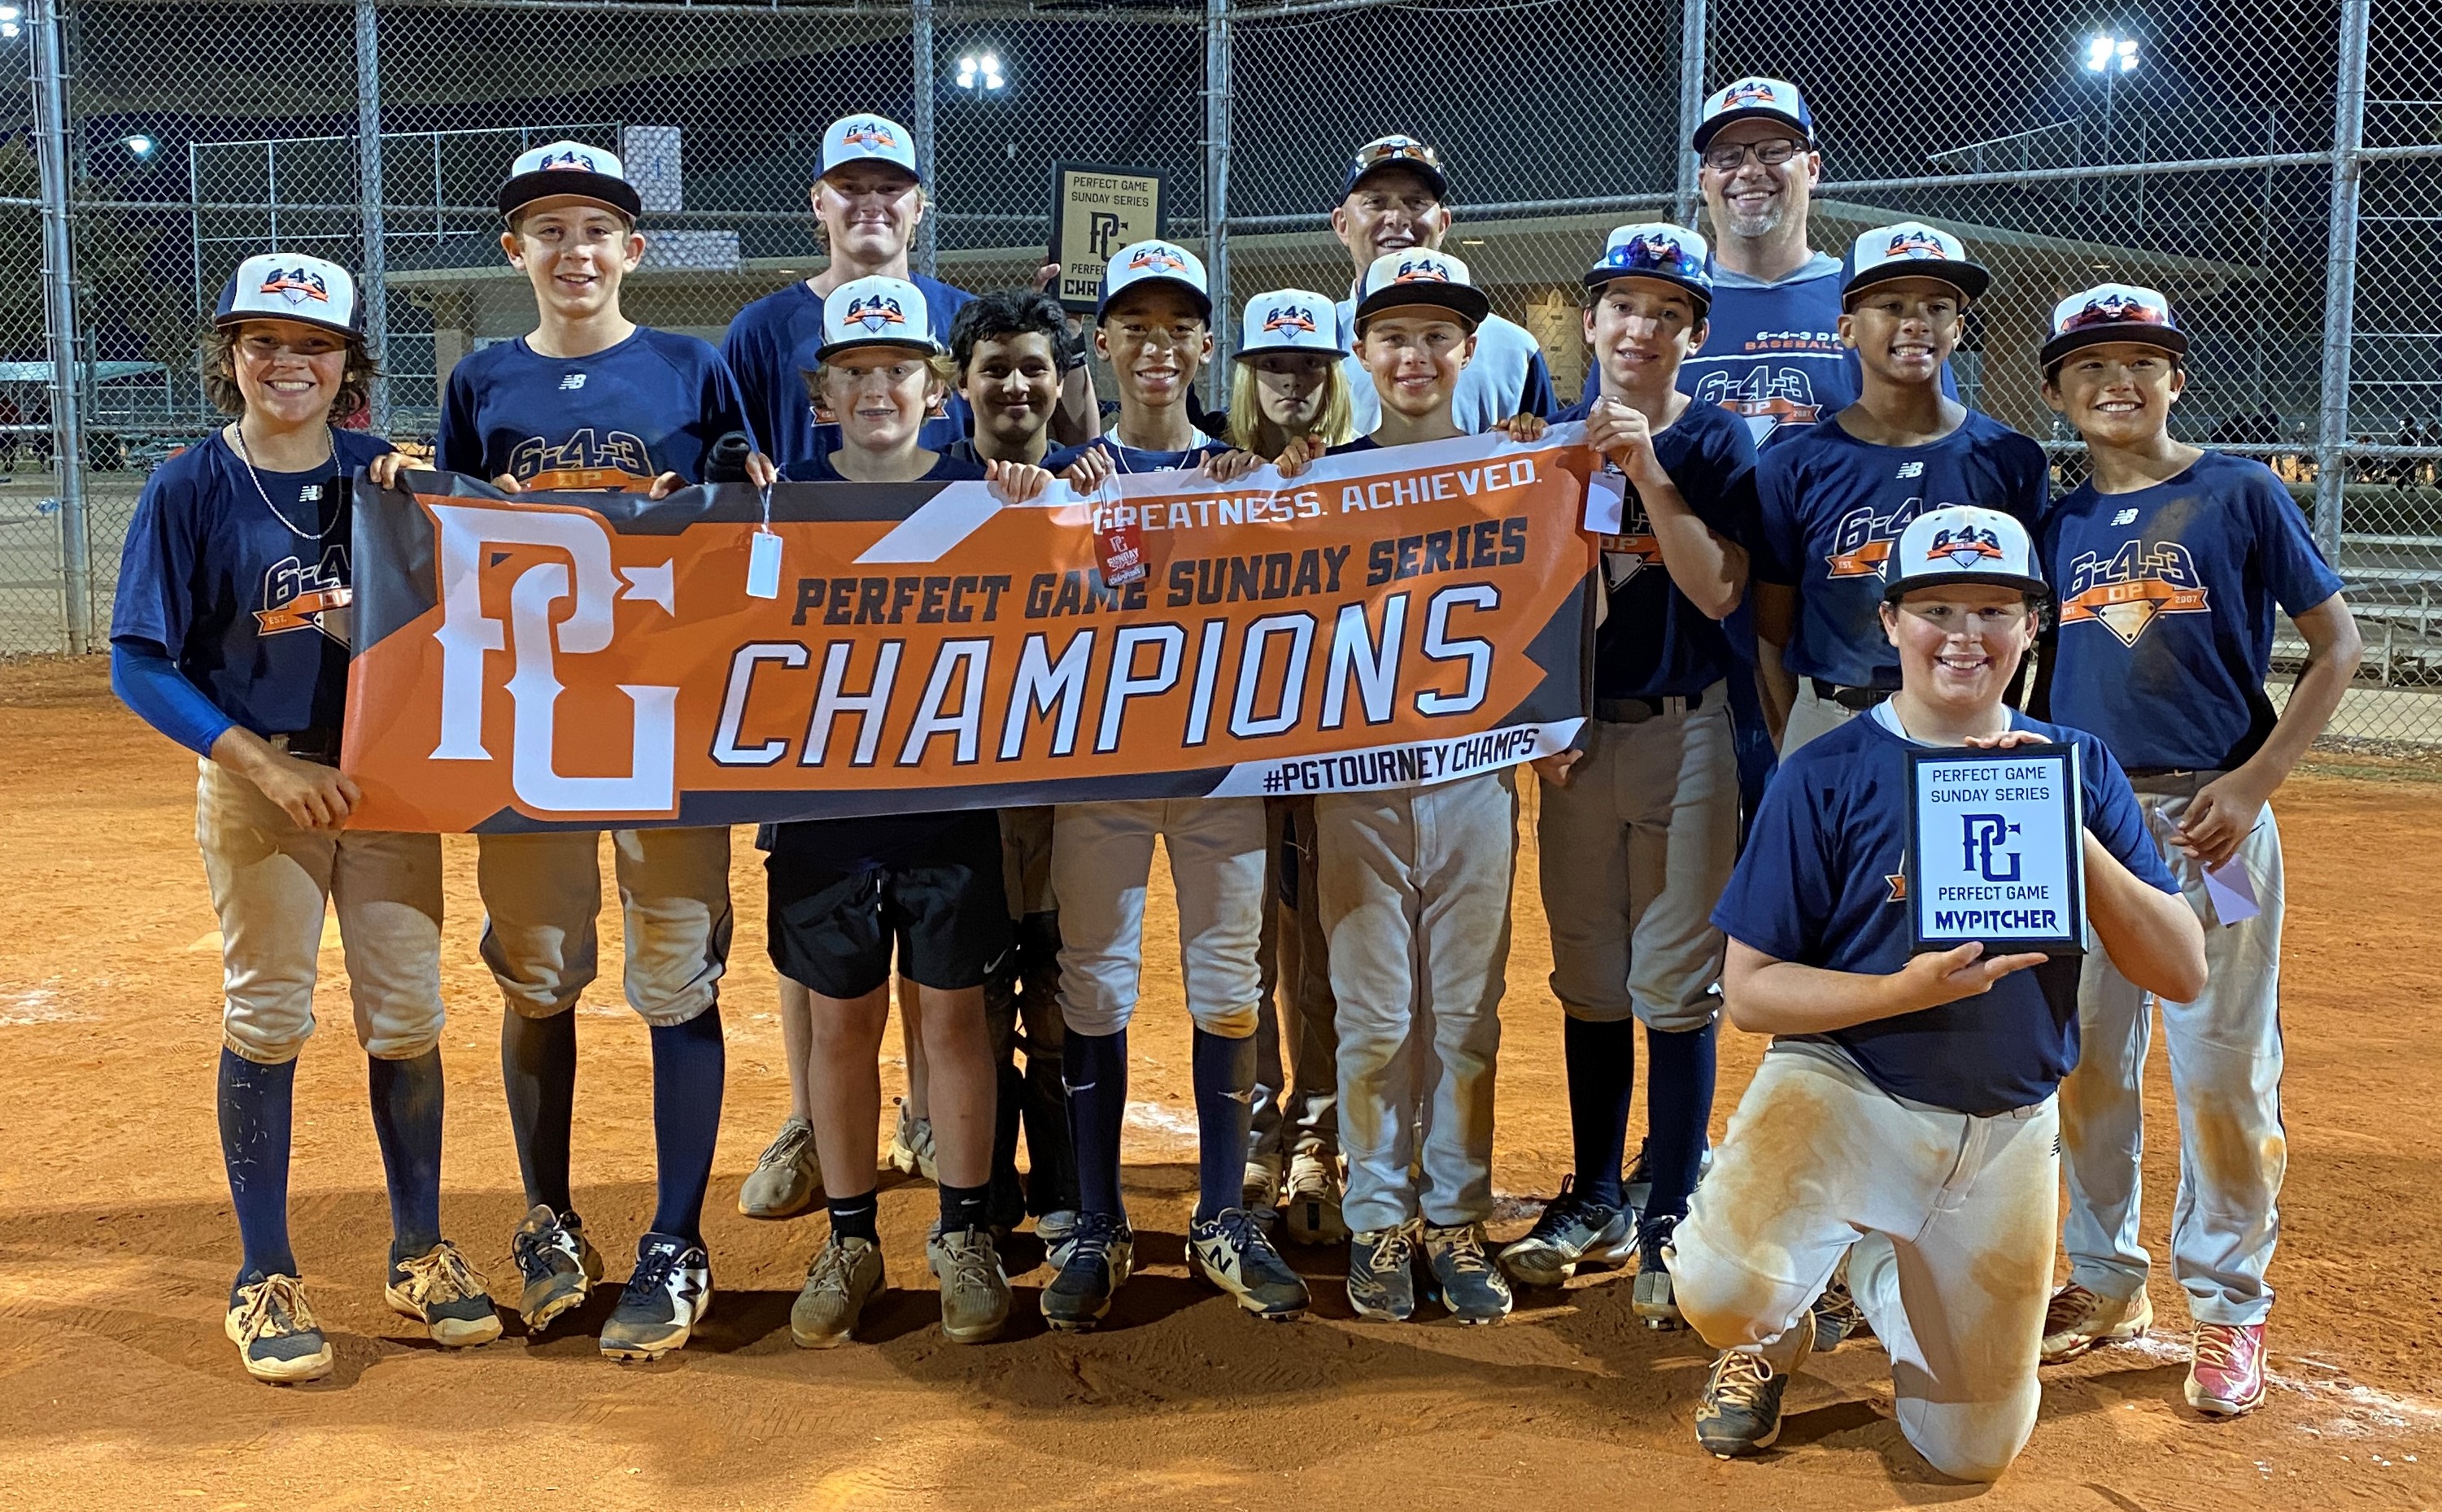 6-4-3 DP Baseball on Twitter: "ICYMI Congratulations to the 6-4-3 DP Panthers 13U squad winning the Perfect Game Series #6 C/minor) on October 16! Congrats to Brady Haff